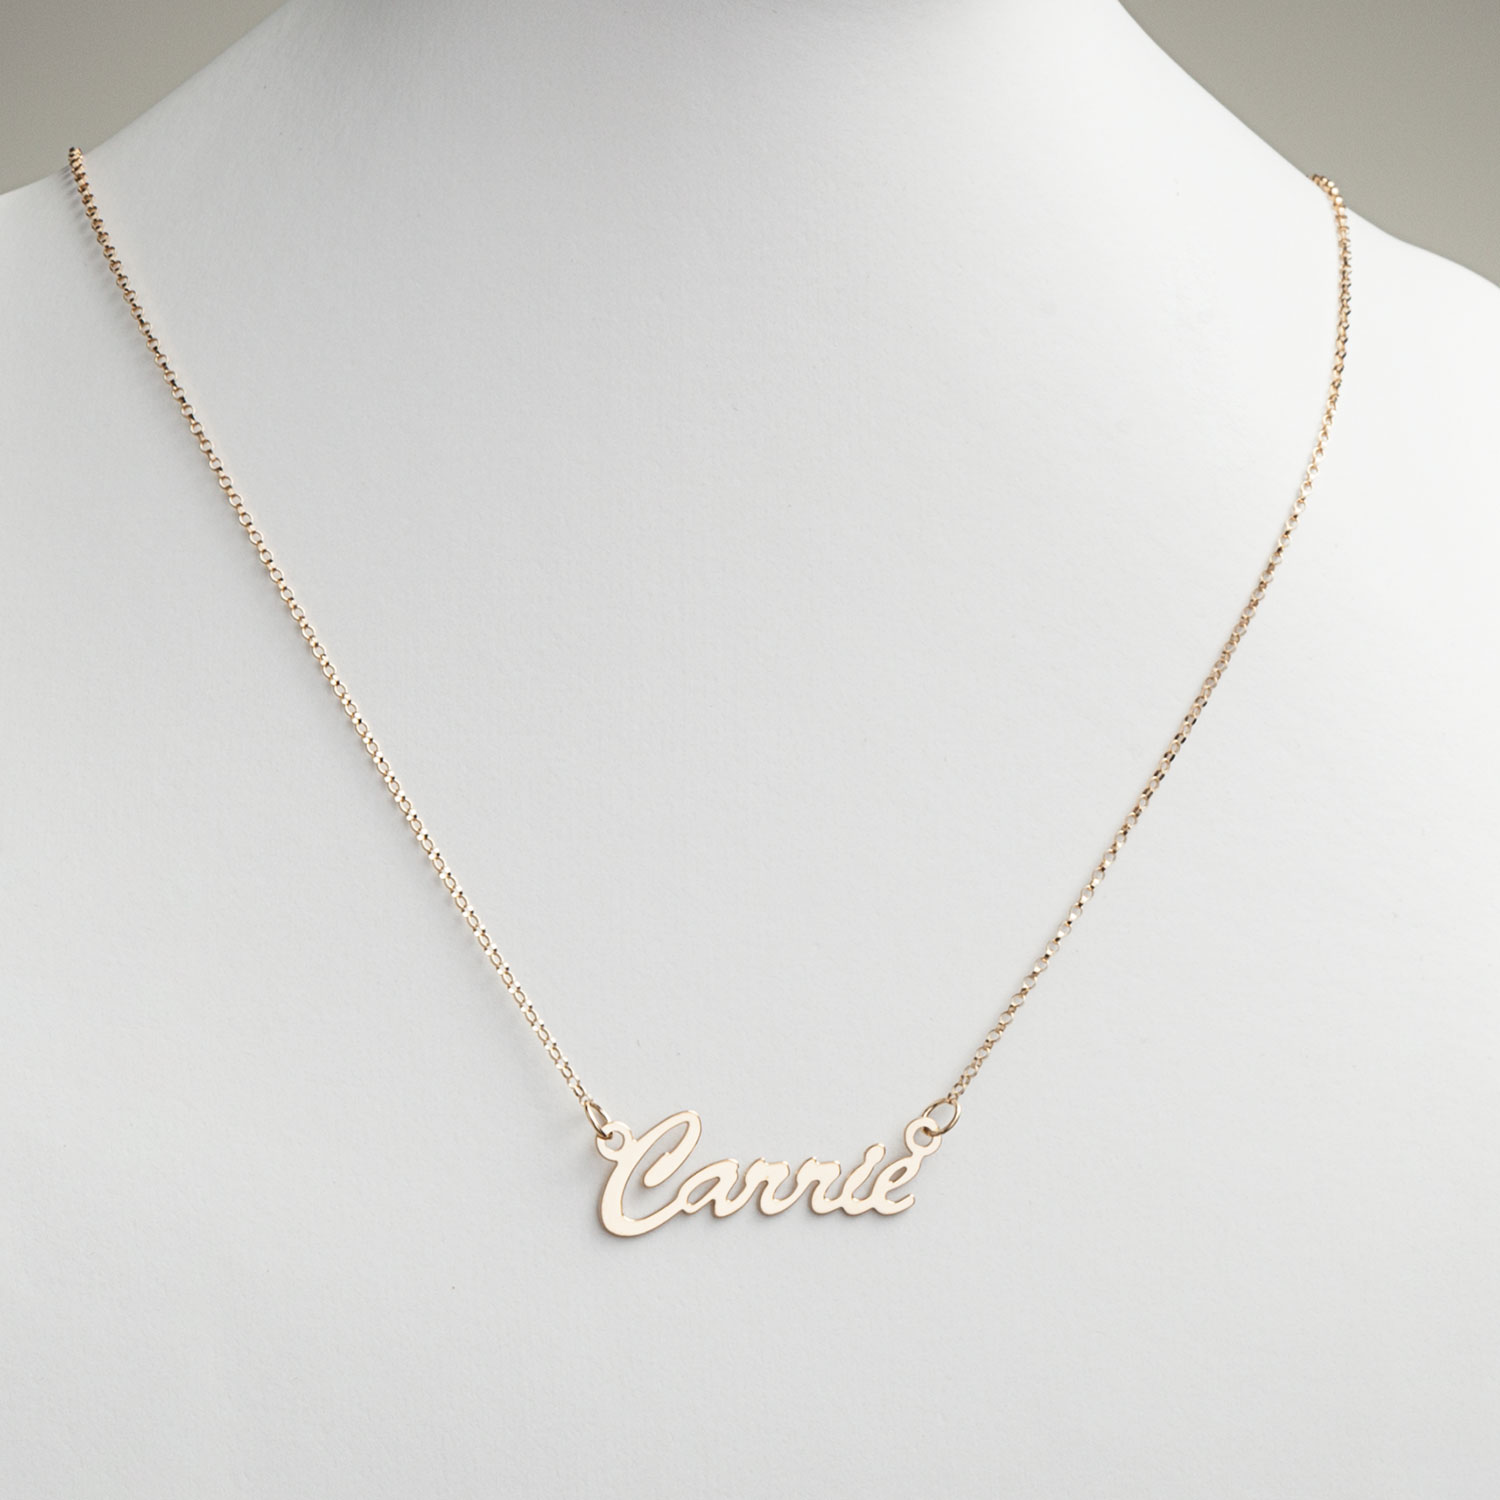 Personalized Planet Women's 14kt Gold-Plated Sterling Hollywood Nameplate Necklace,18" - image 3 of 5